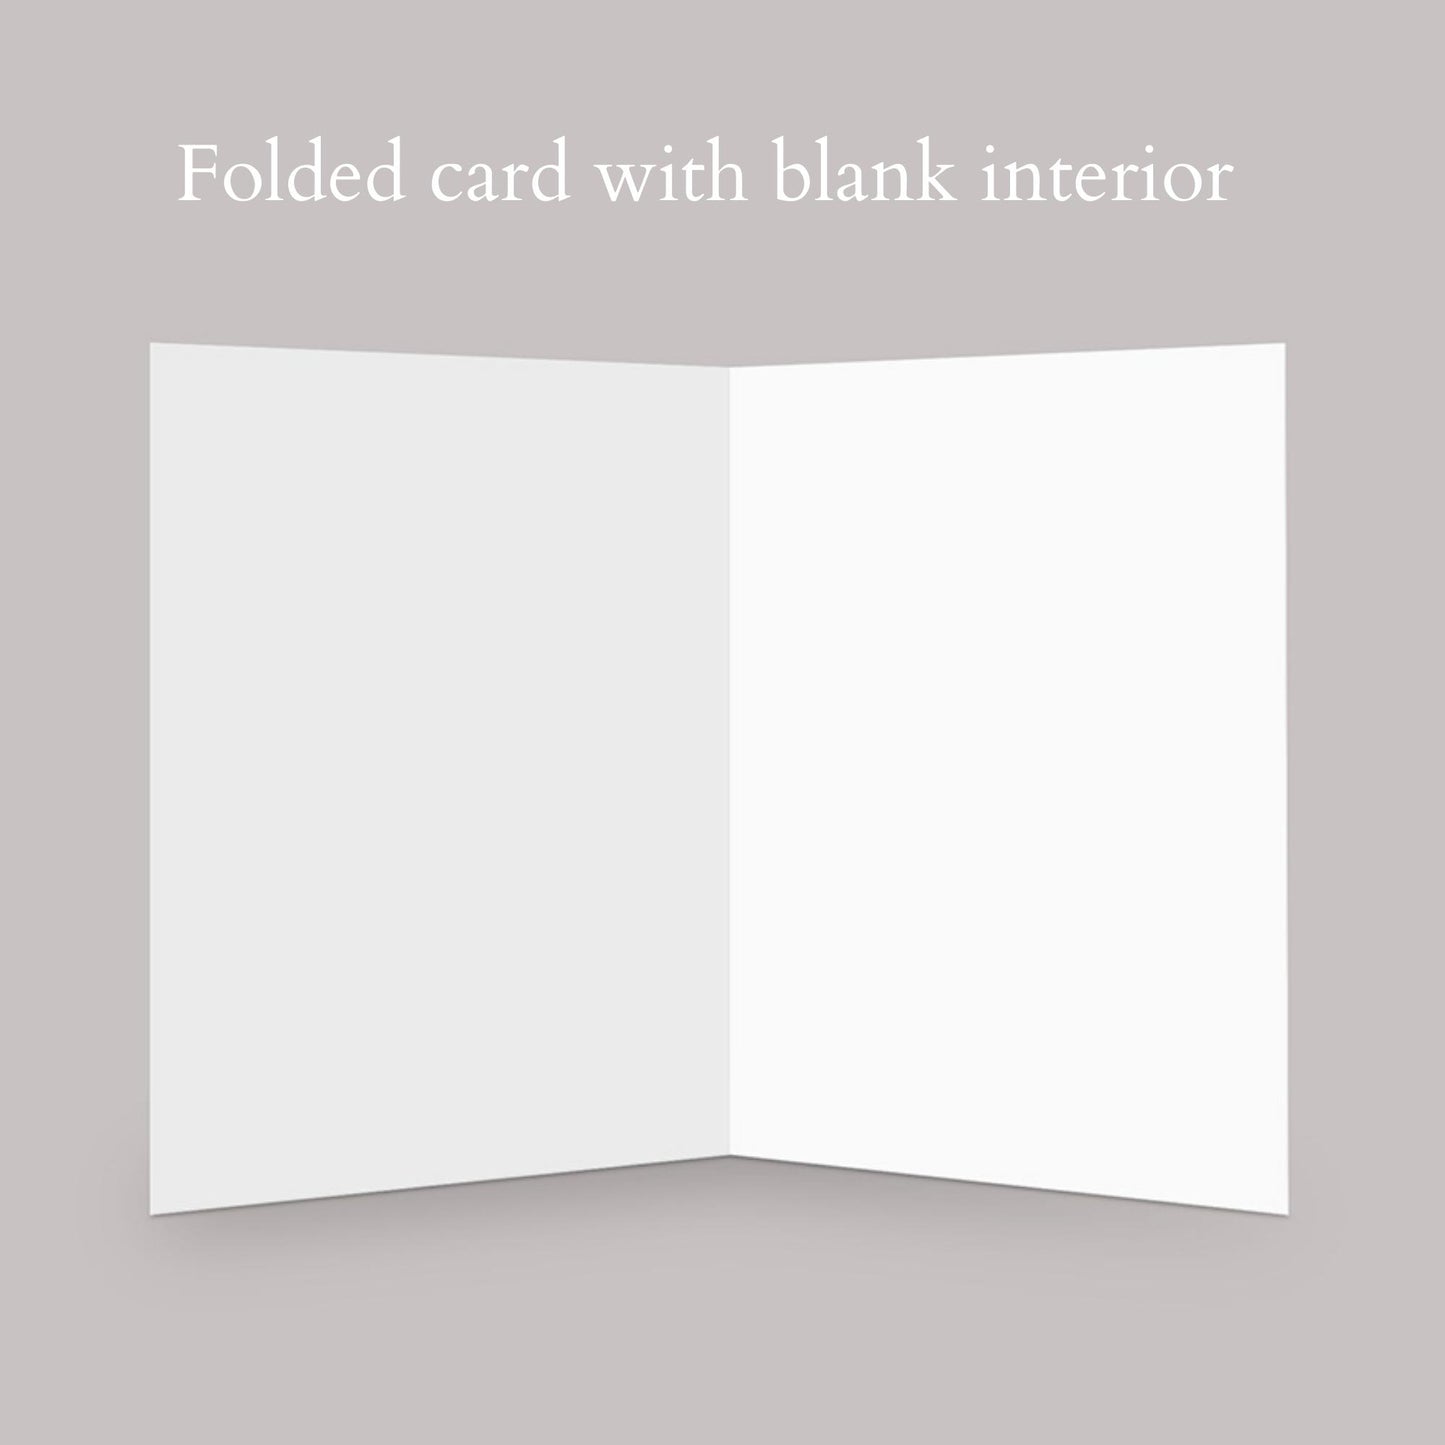 folded card with a blank interior